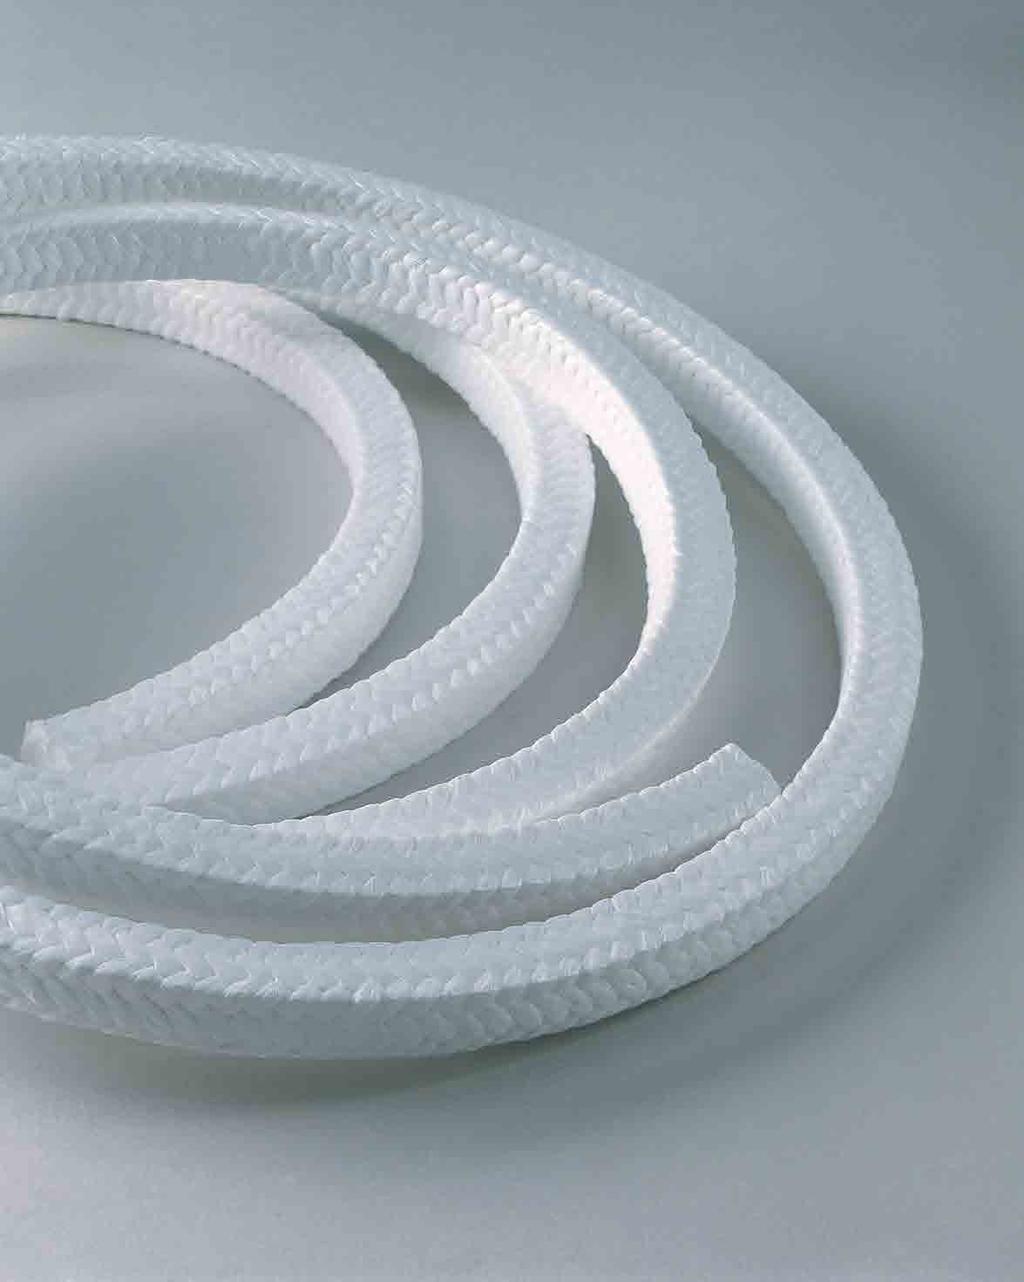 Packing and Gasket Product Catalog VALVE PACKING 1724 High Quality, Interbraided PTFE Valve Packing Chesterton 1724 is a unique PTFE valve packing material specially treated with protective